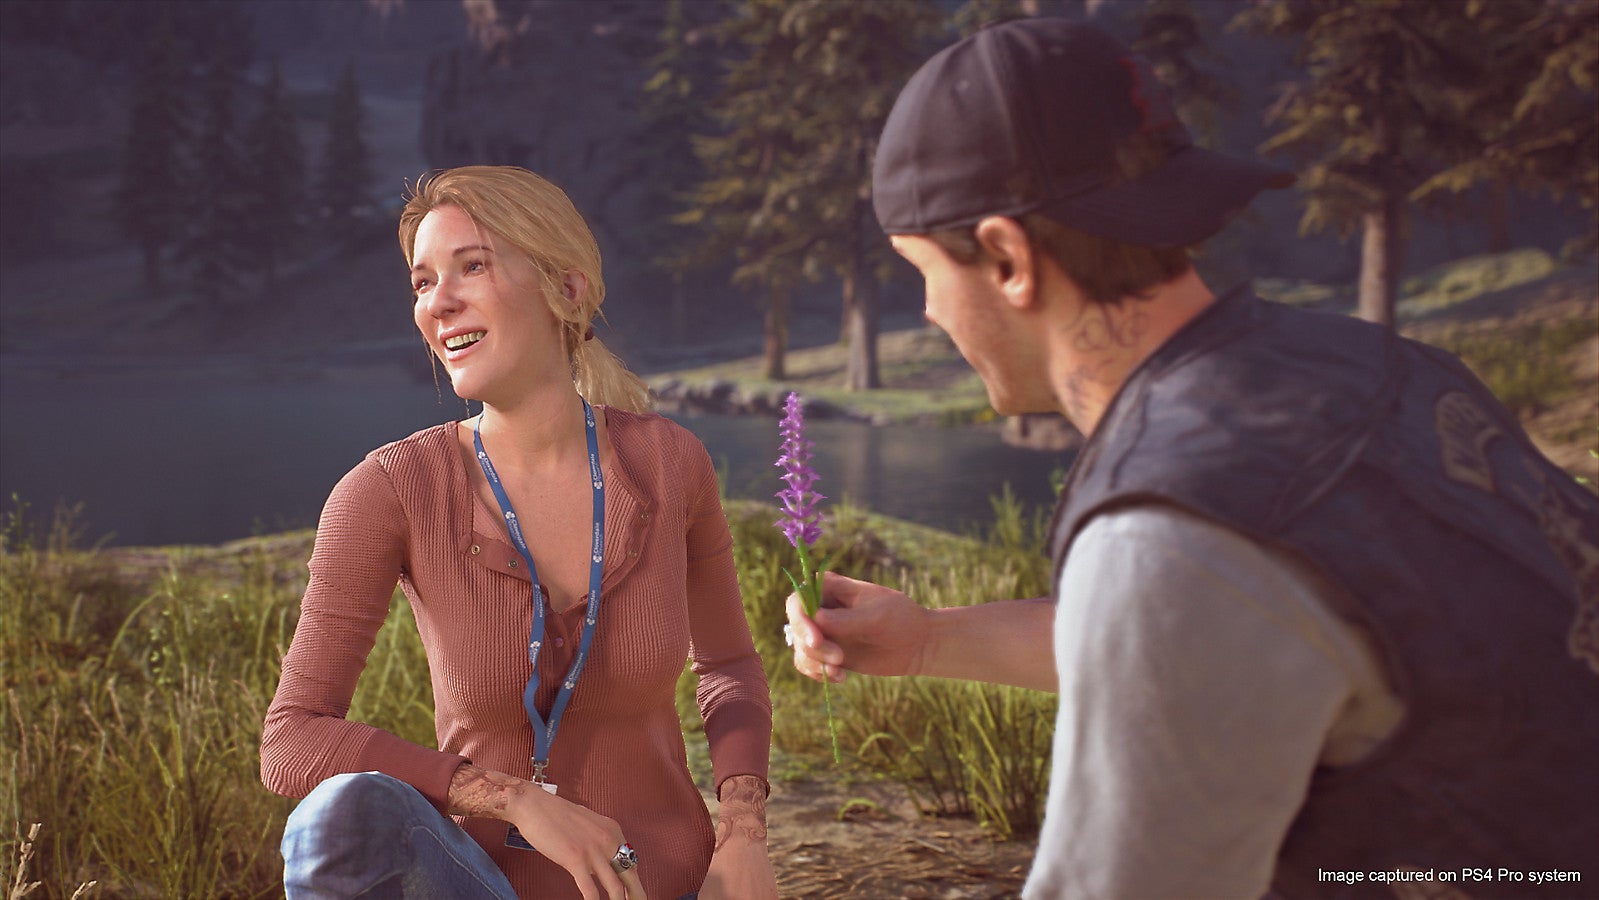 Image for Days Gone tops European PlayStation Store charts in April, beaten by Mortal Kombat 11 in North America